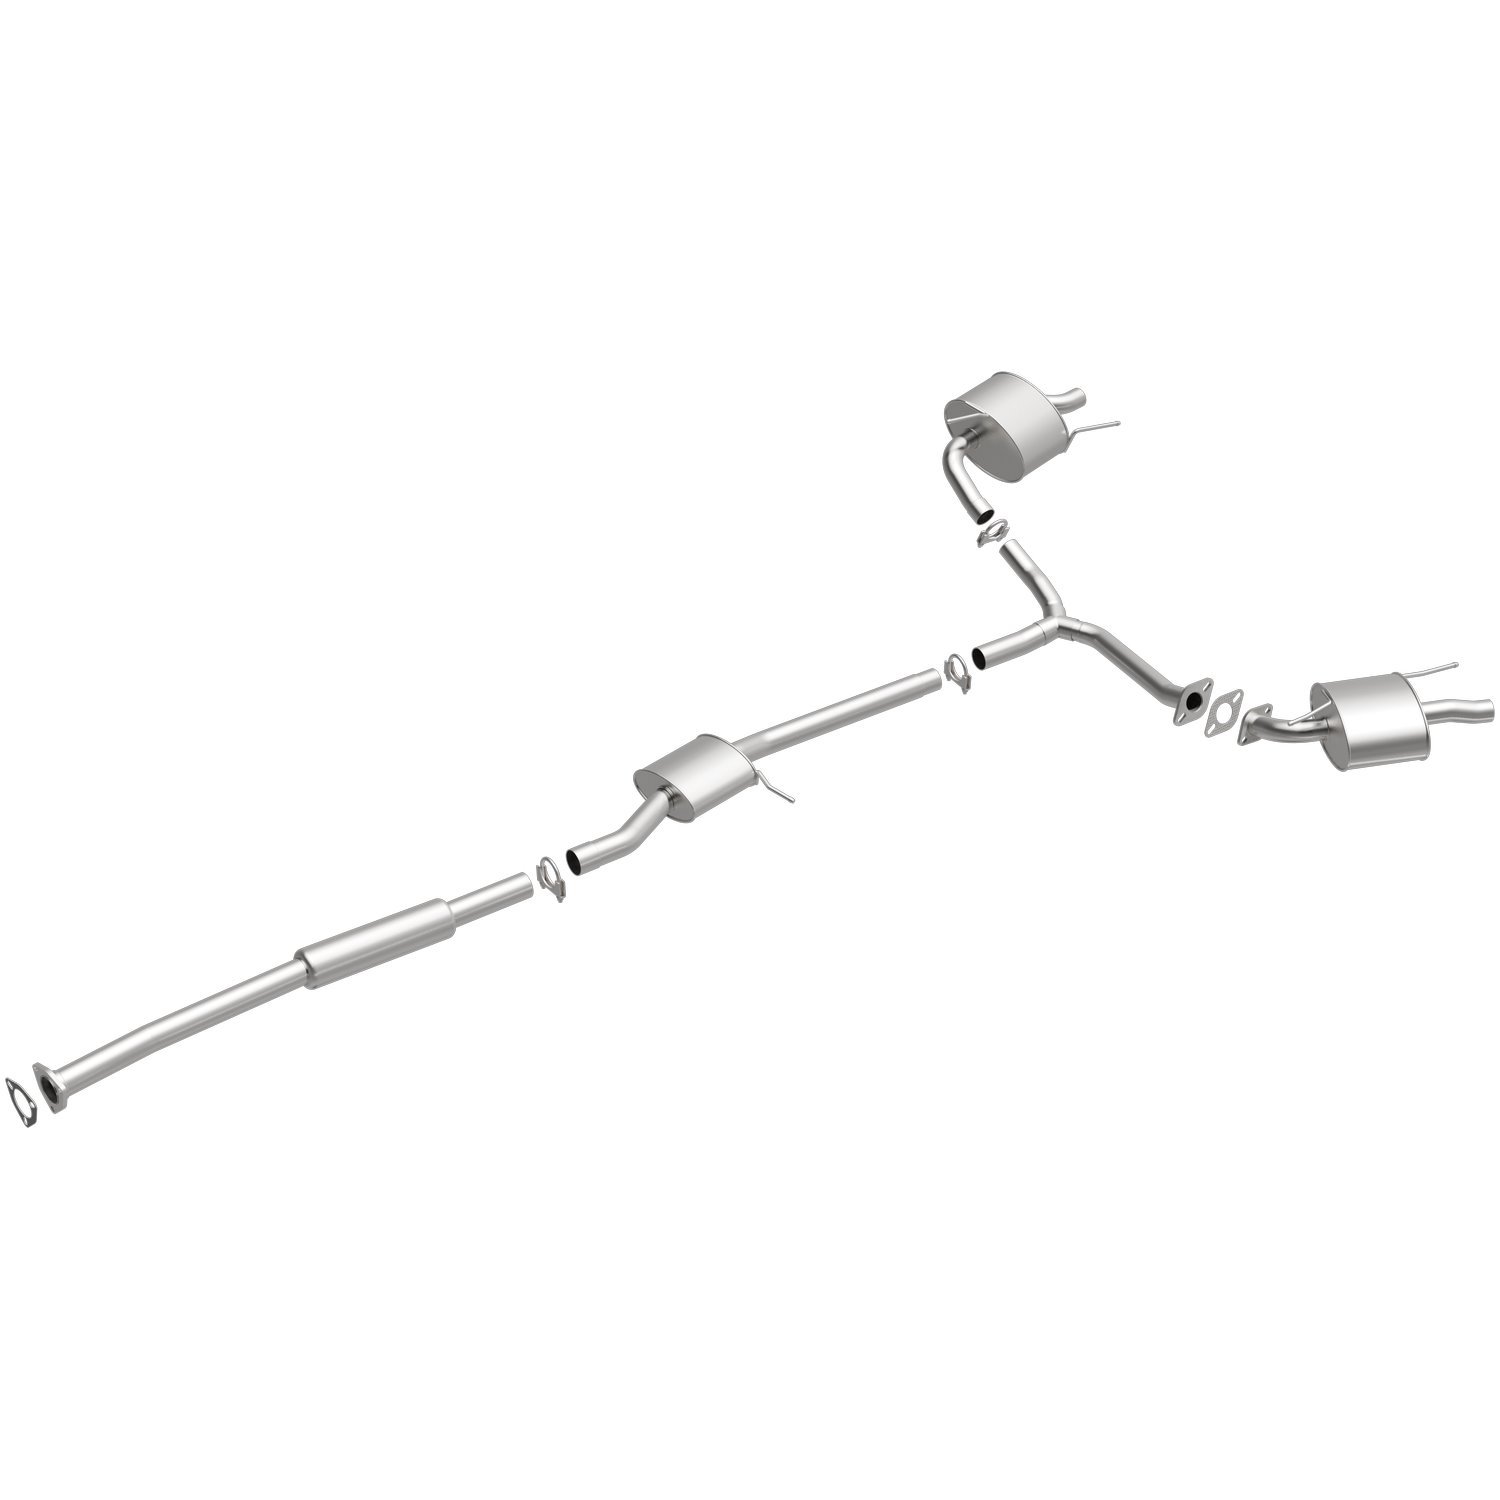 Direct-Fit Exhaust Kit, 2004-2008 Acura TL 3.2L